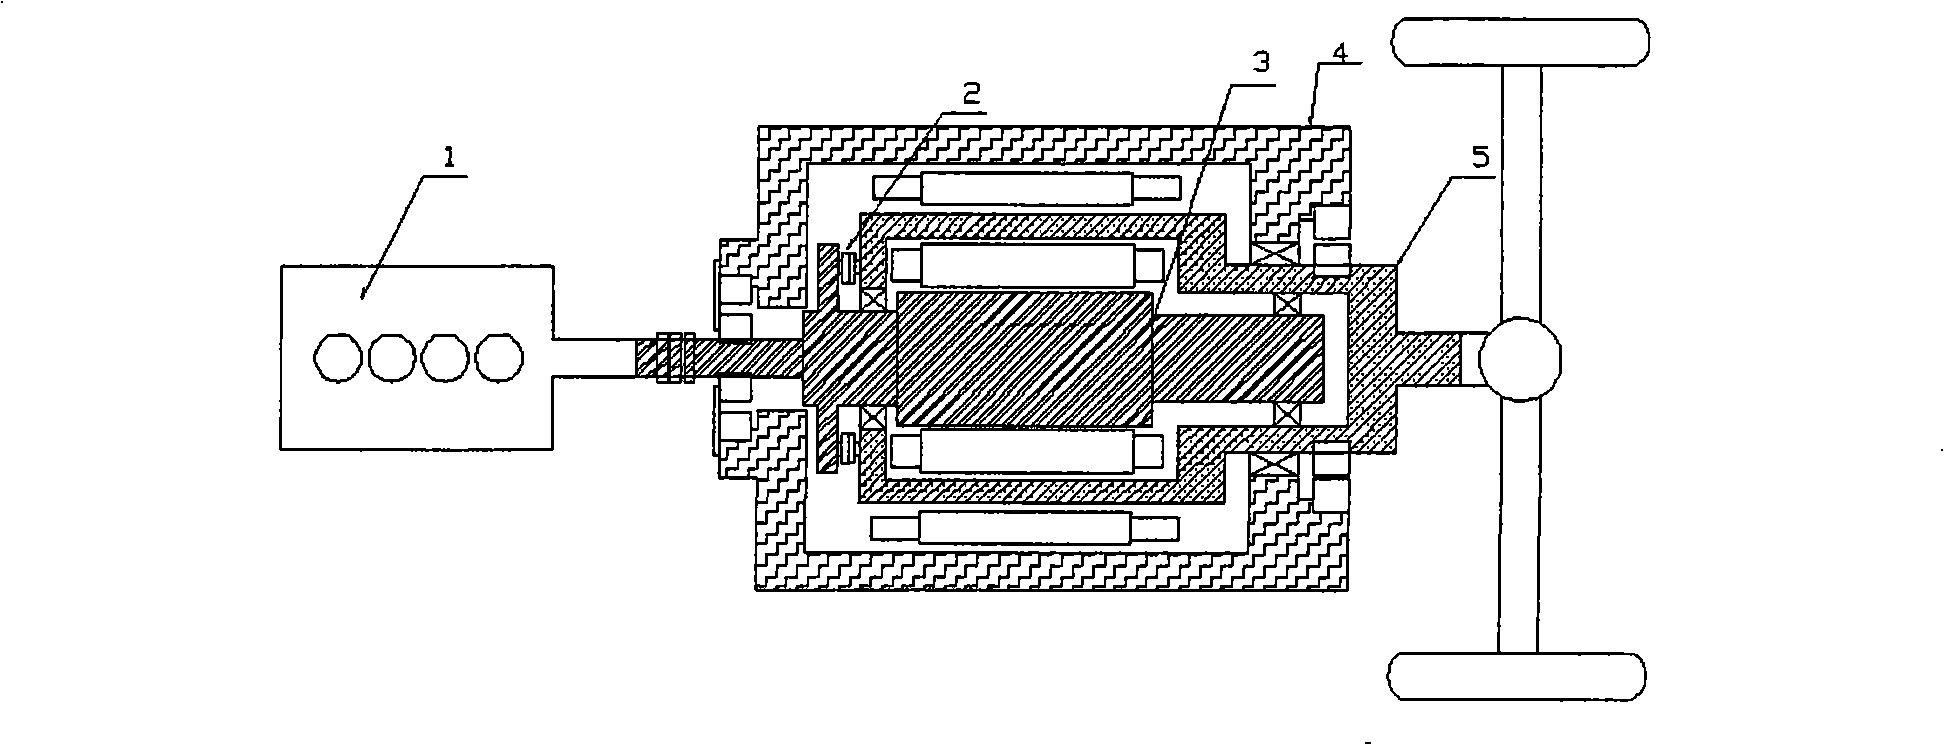 Control method for hybrid power automobile equipped with two mechanical end motors